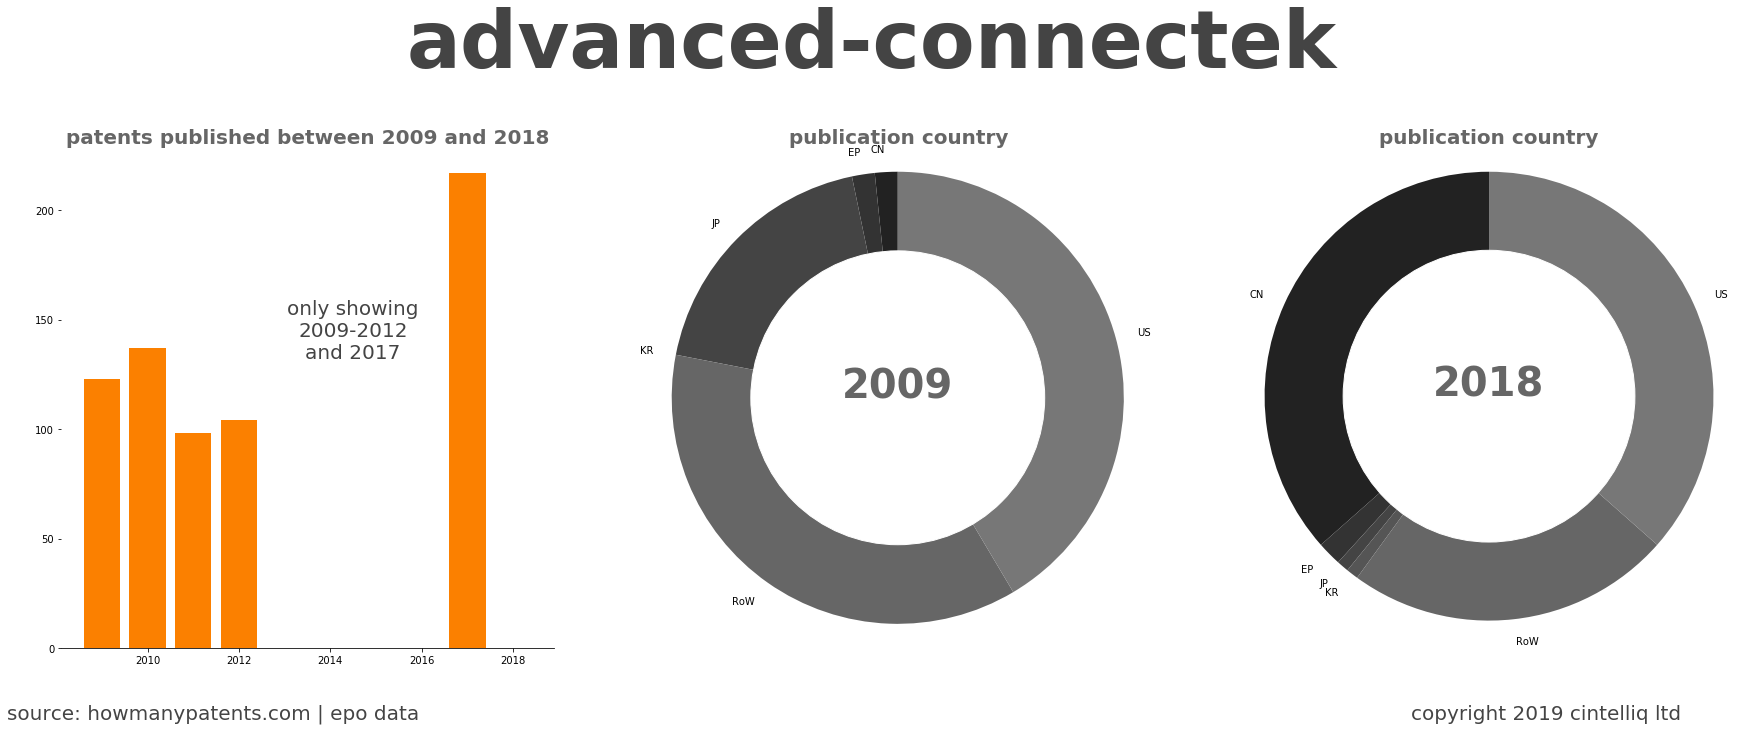 summary of patents for Advanced-Connectek